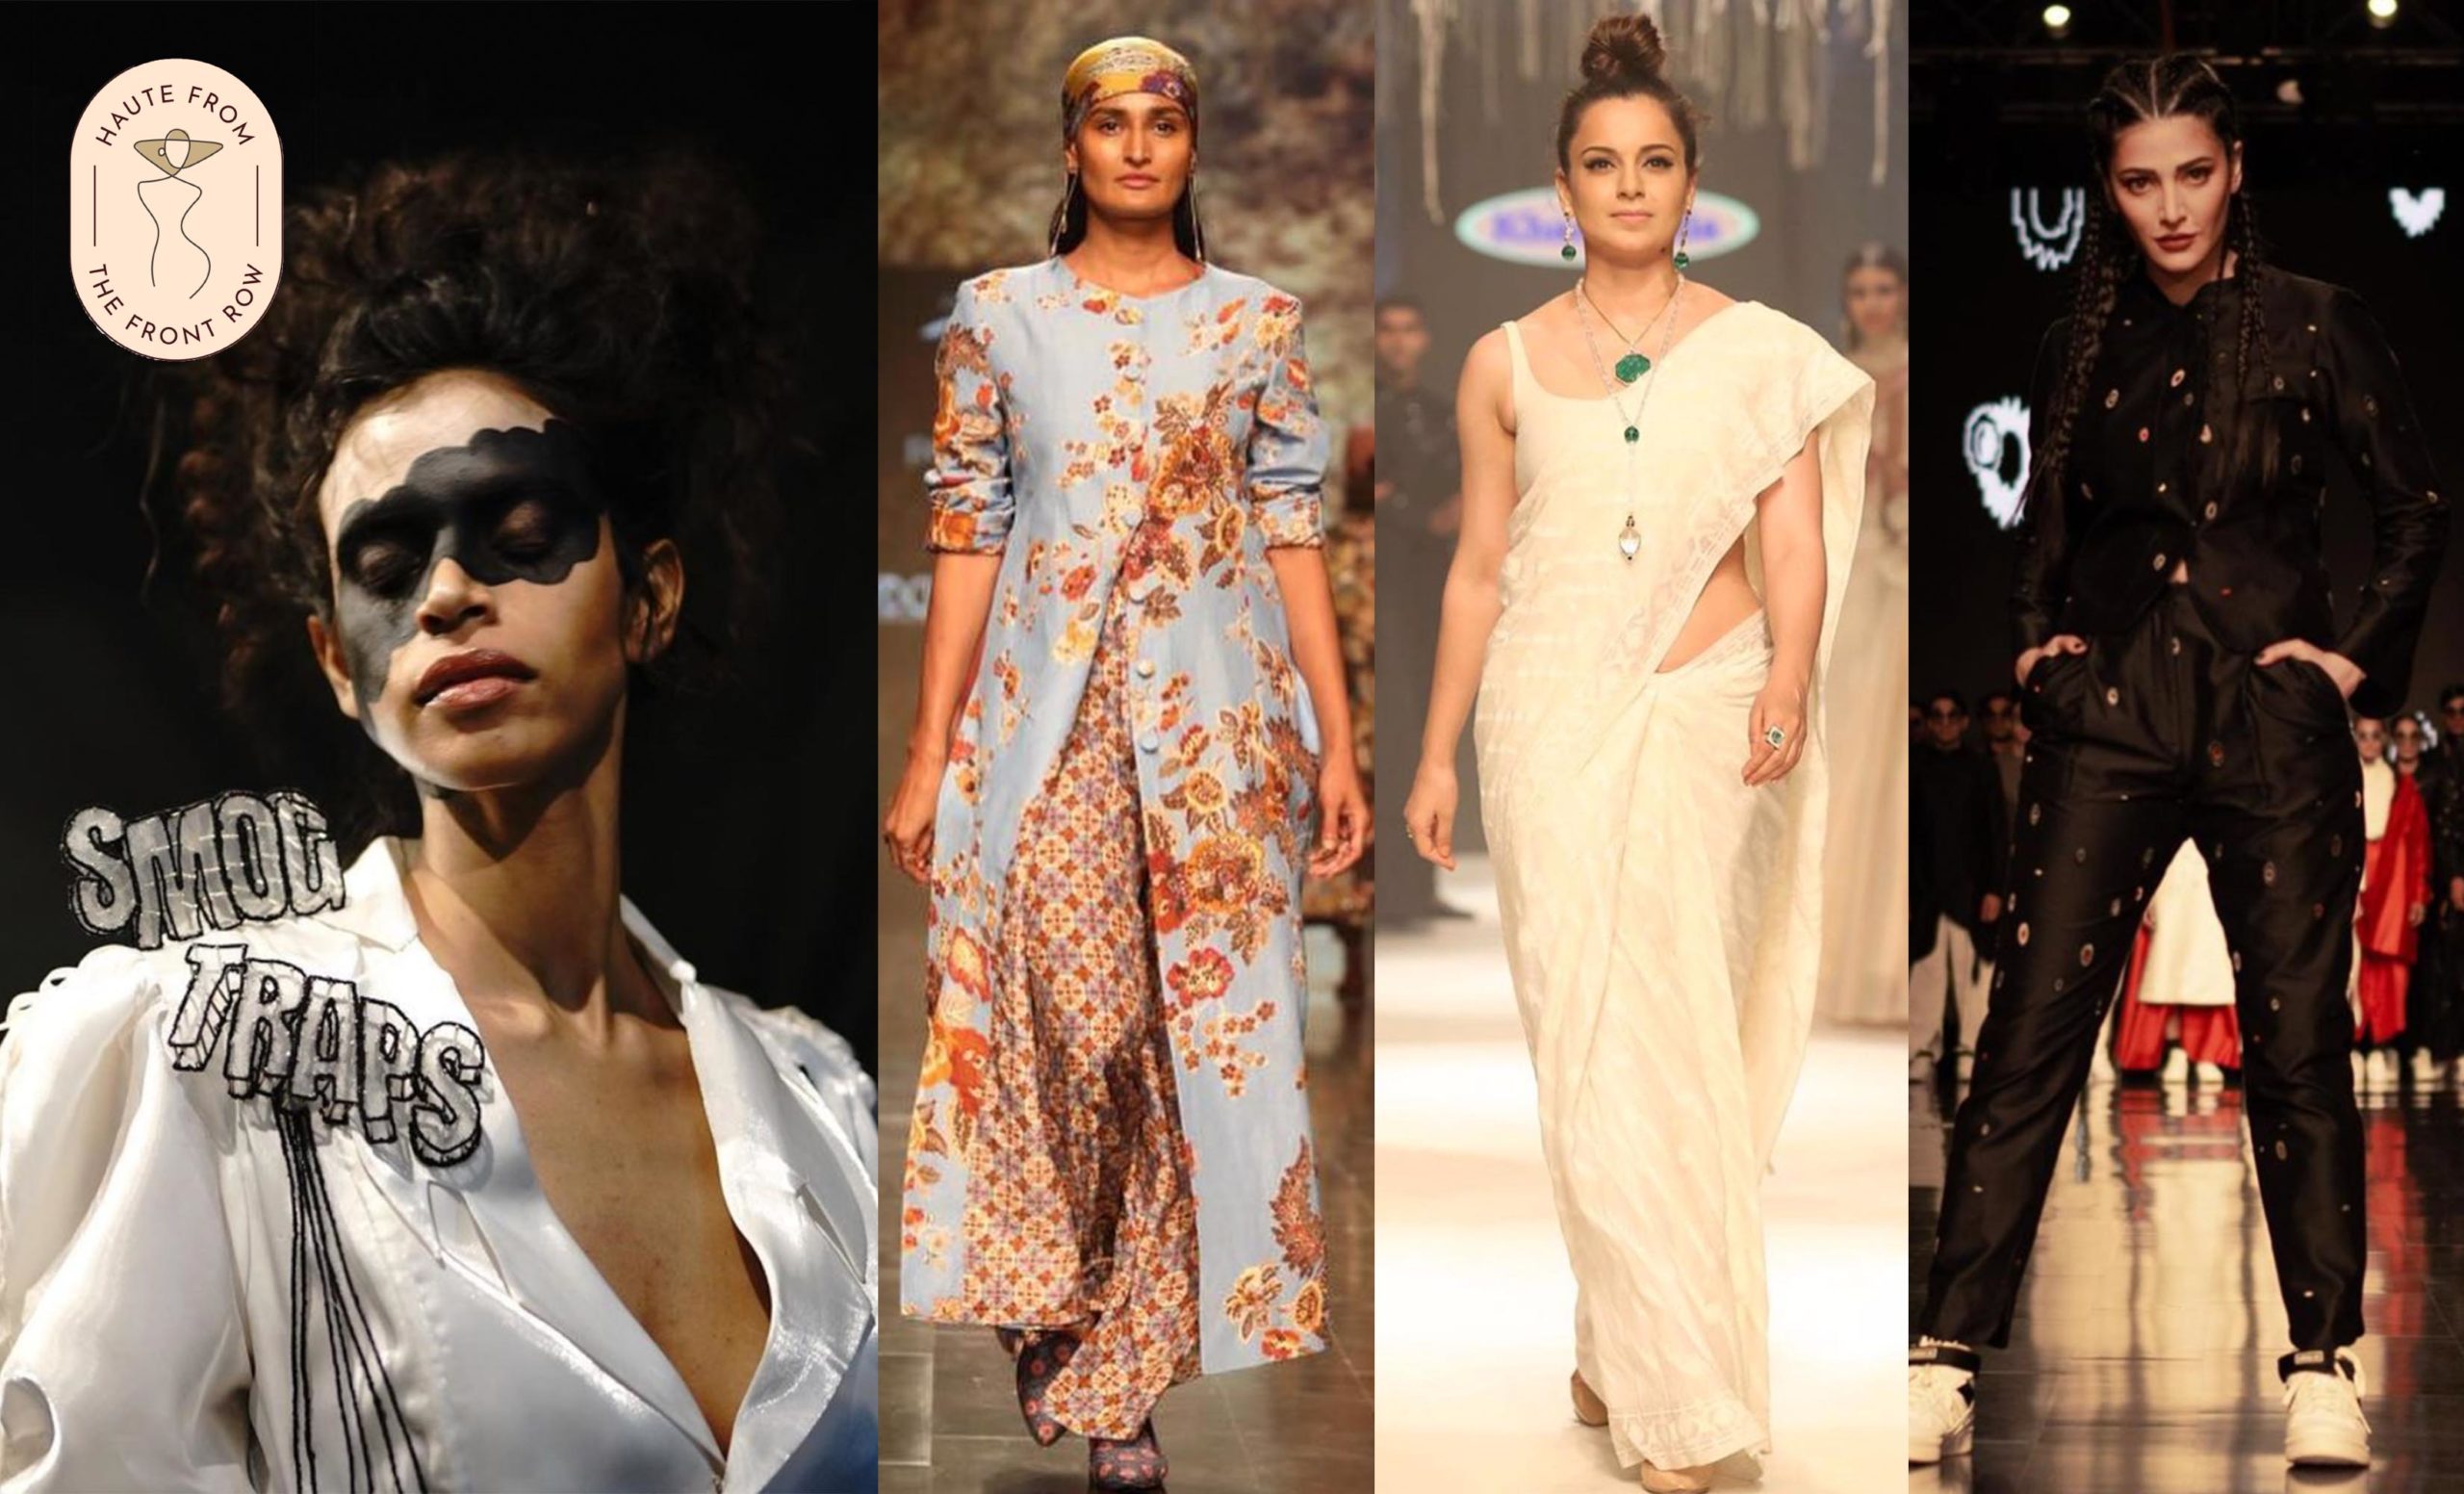 FDCI X Lakmé Fashion Week Day 2 Was A Celebration Of Style That Is Greener, Vibrant And An Ode To Khadi With Kangana Ranaut As The Showstopper